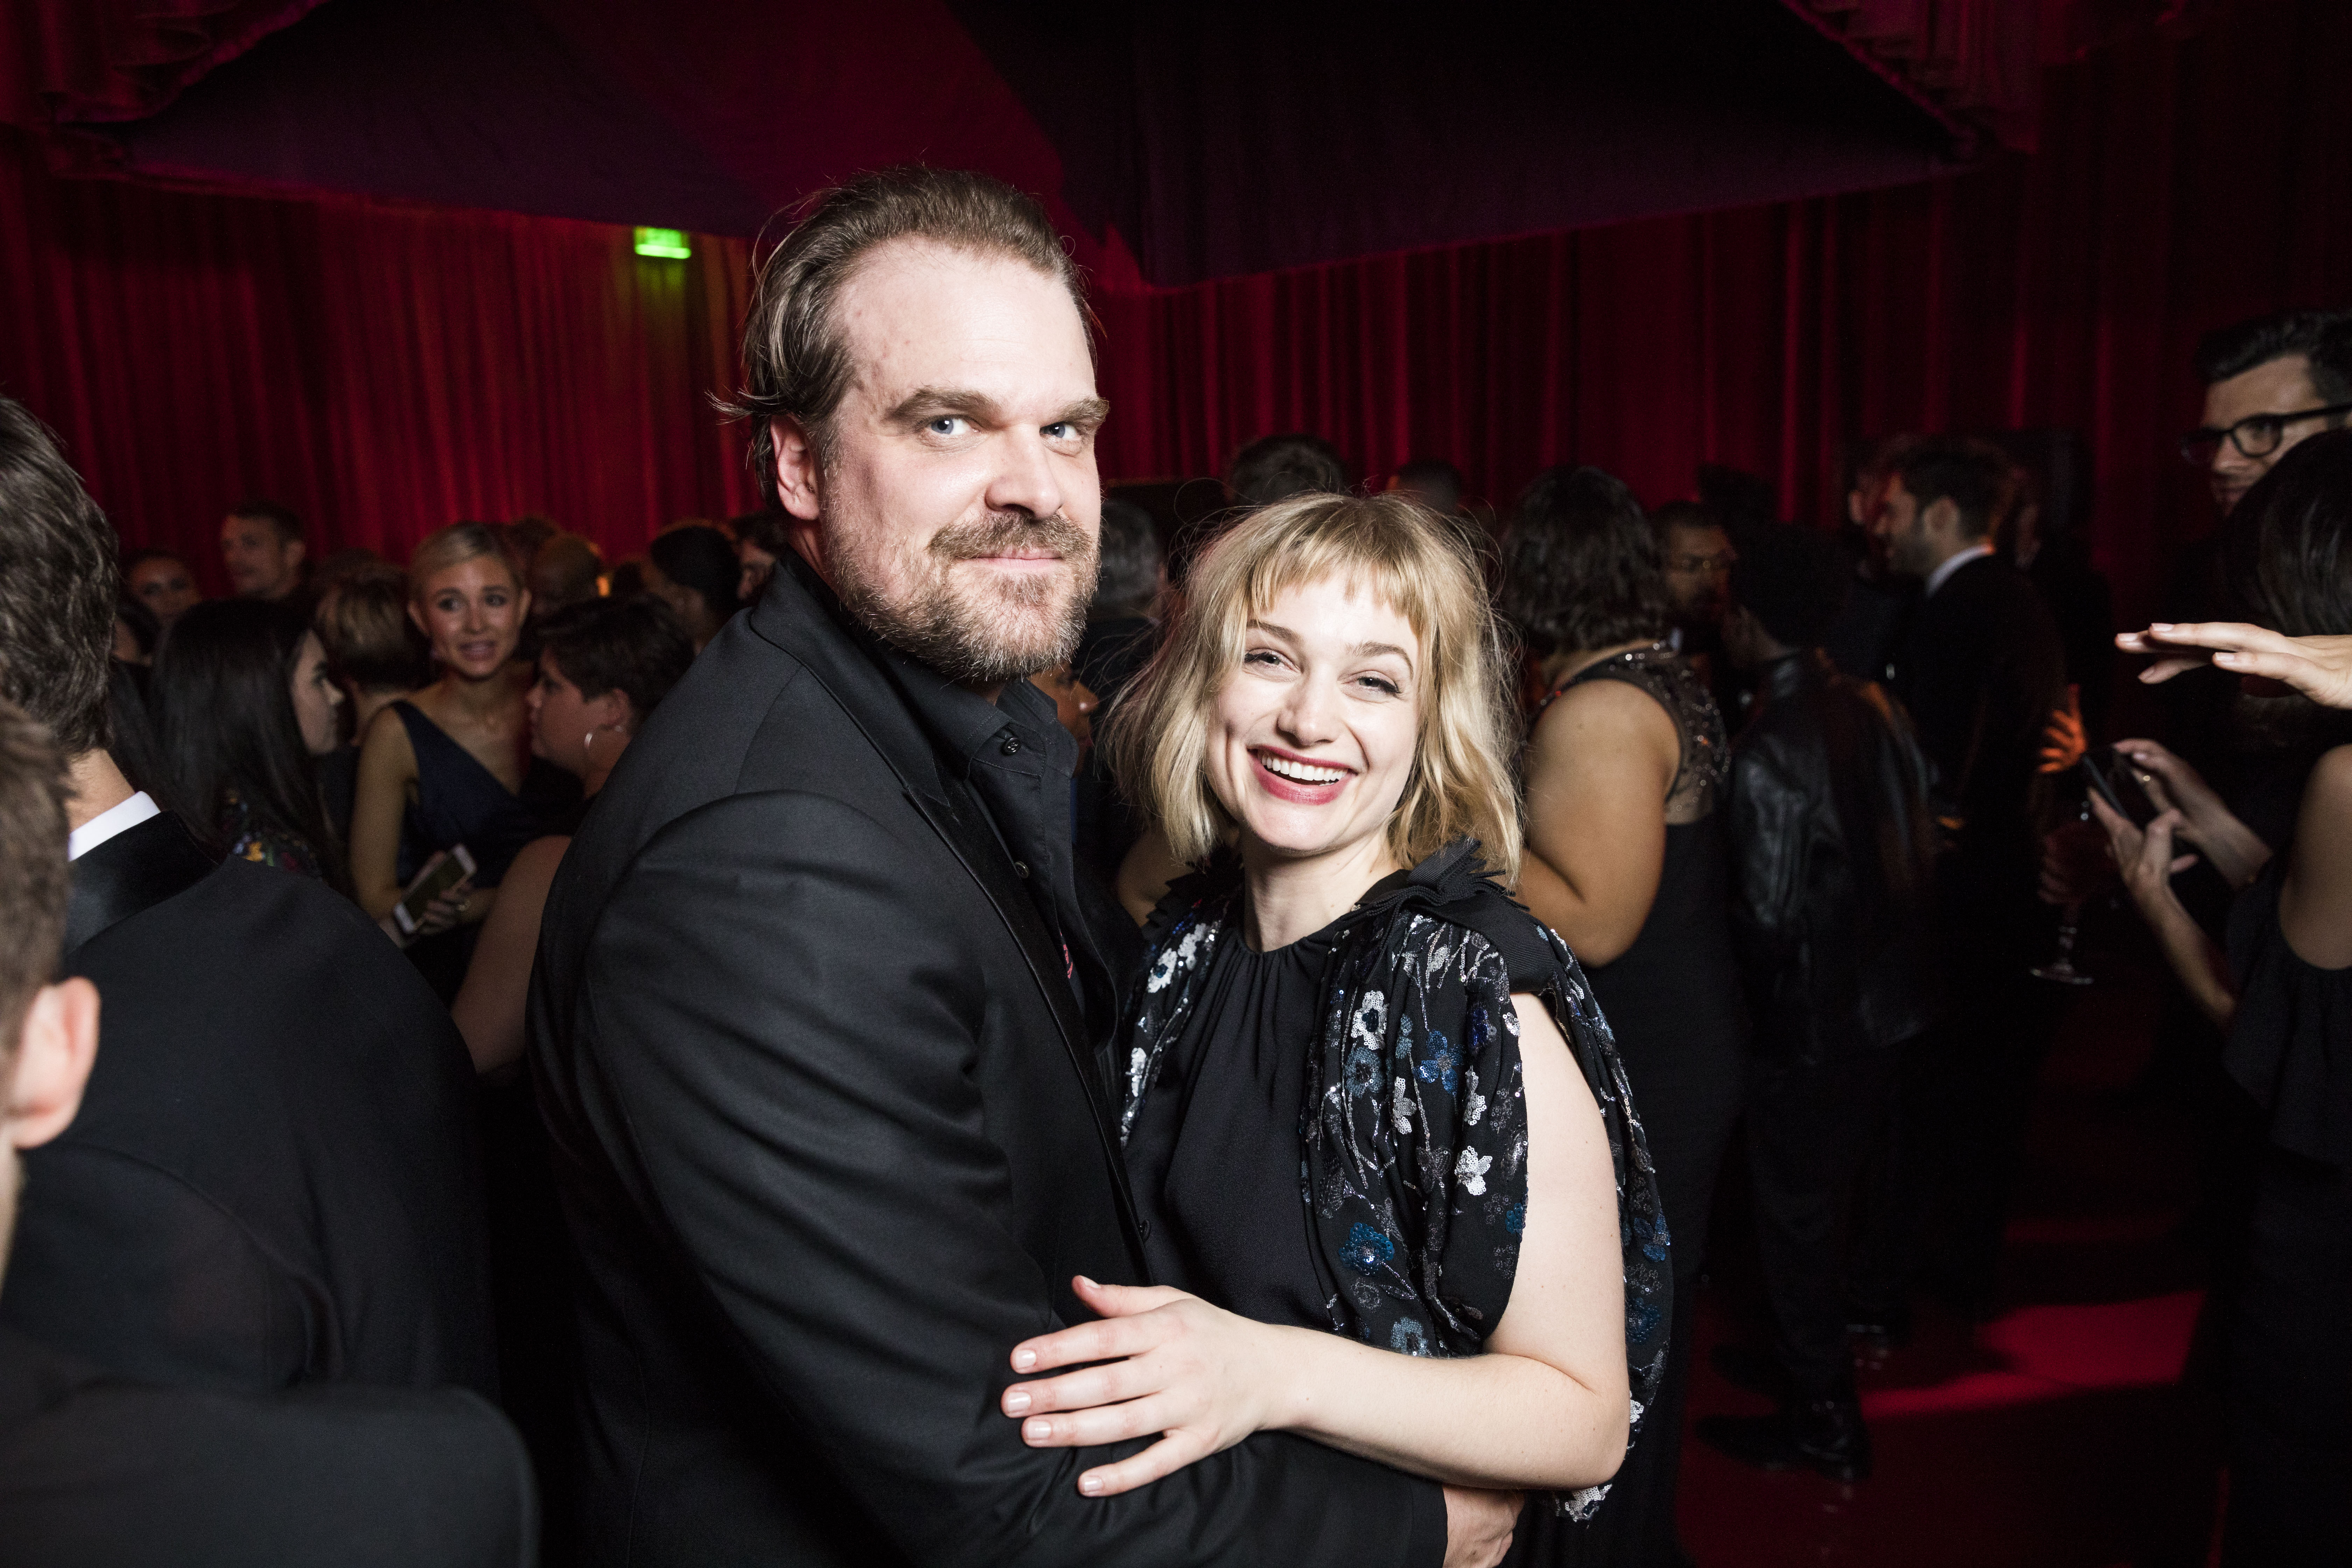 Alison Sudol and David Harbour at the Netflix Golden Globes afterparty on January 7, 2018 | Source: Getty Images